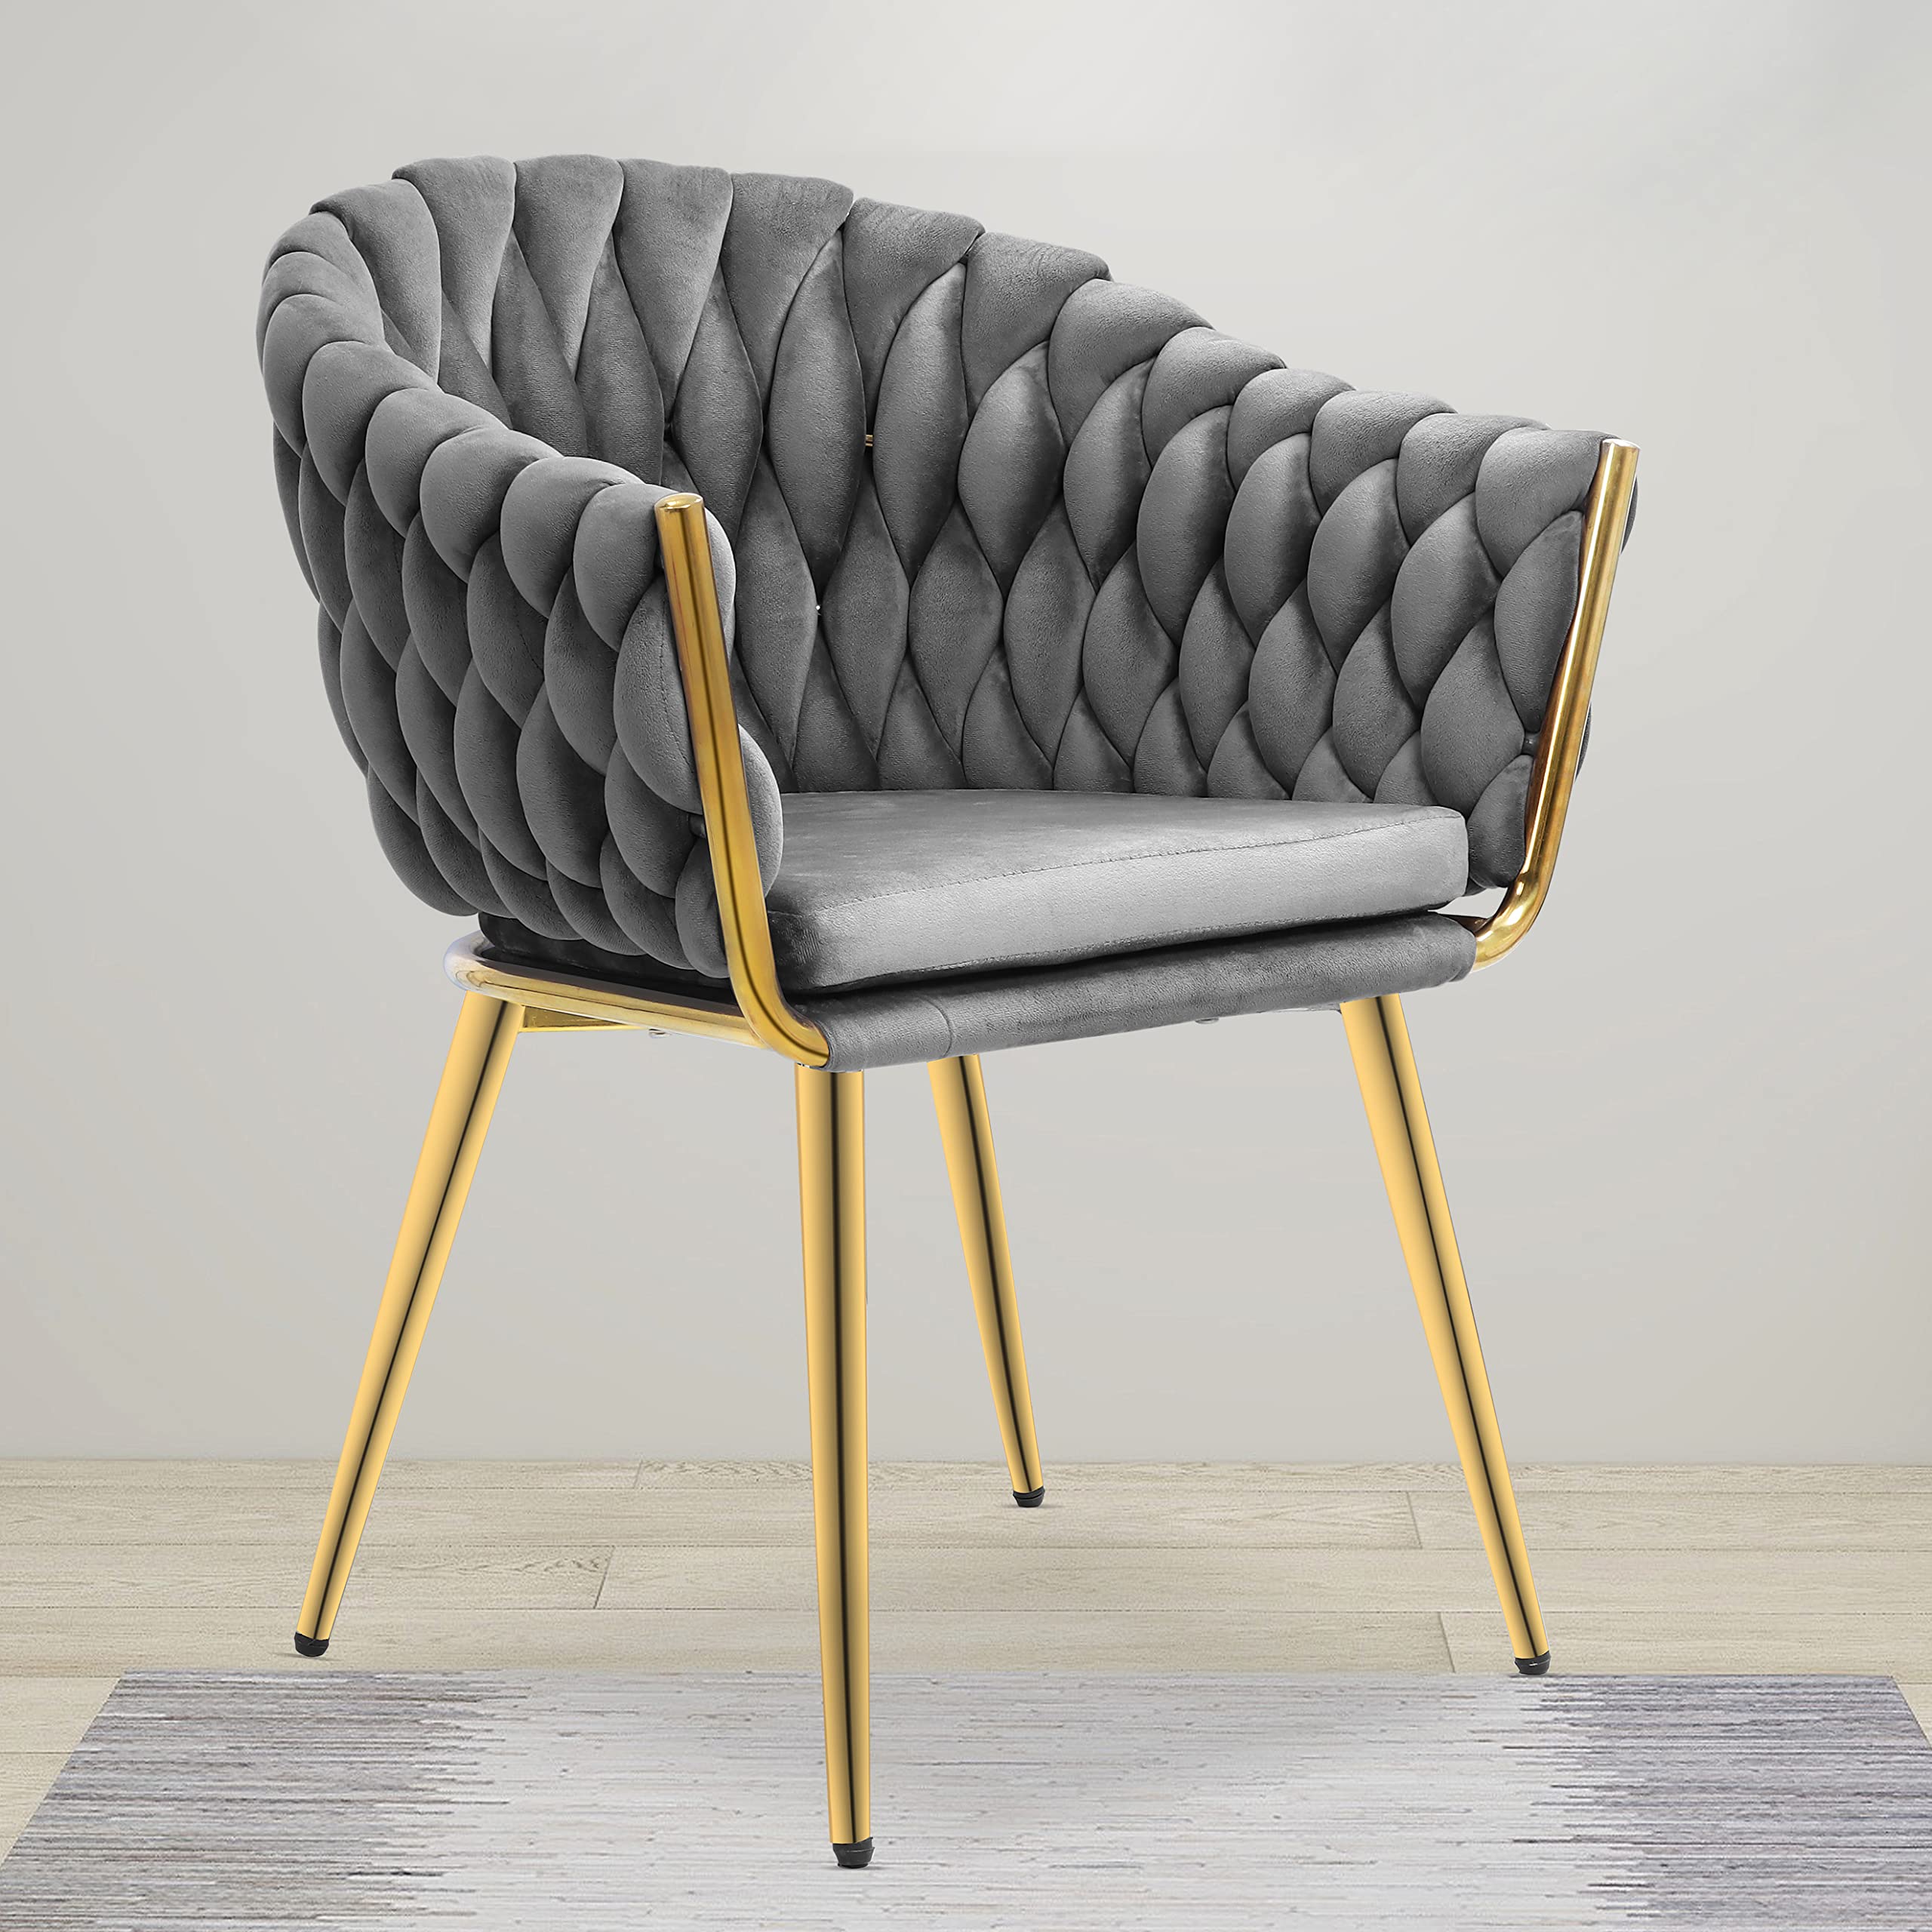 Plantex Morden Peradox Chair with Sitting Cushion for Home/Peradox Chair with PVD Gold Leg for Cafe/Restaurant/Office/Living Room/Bed Room (APS-1042-Grey & PVD Gold)